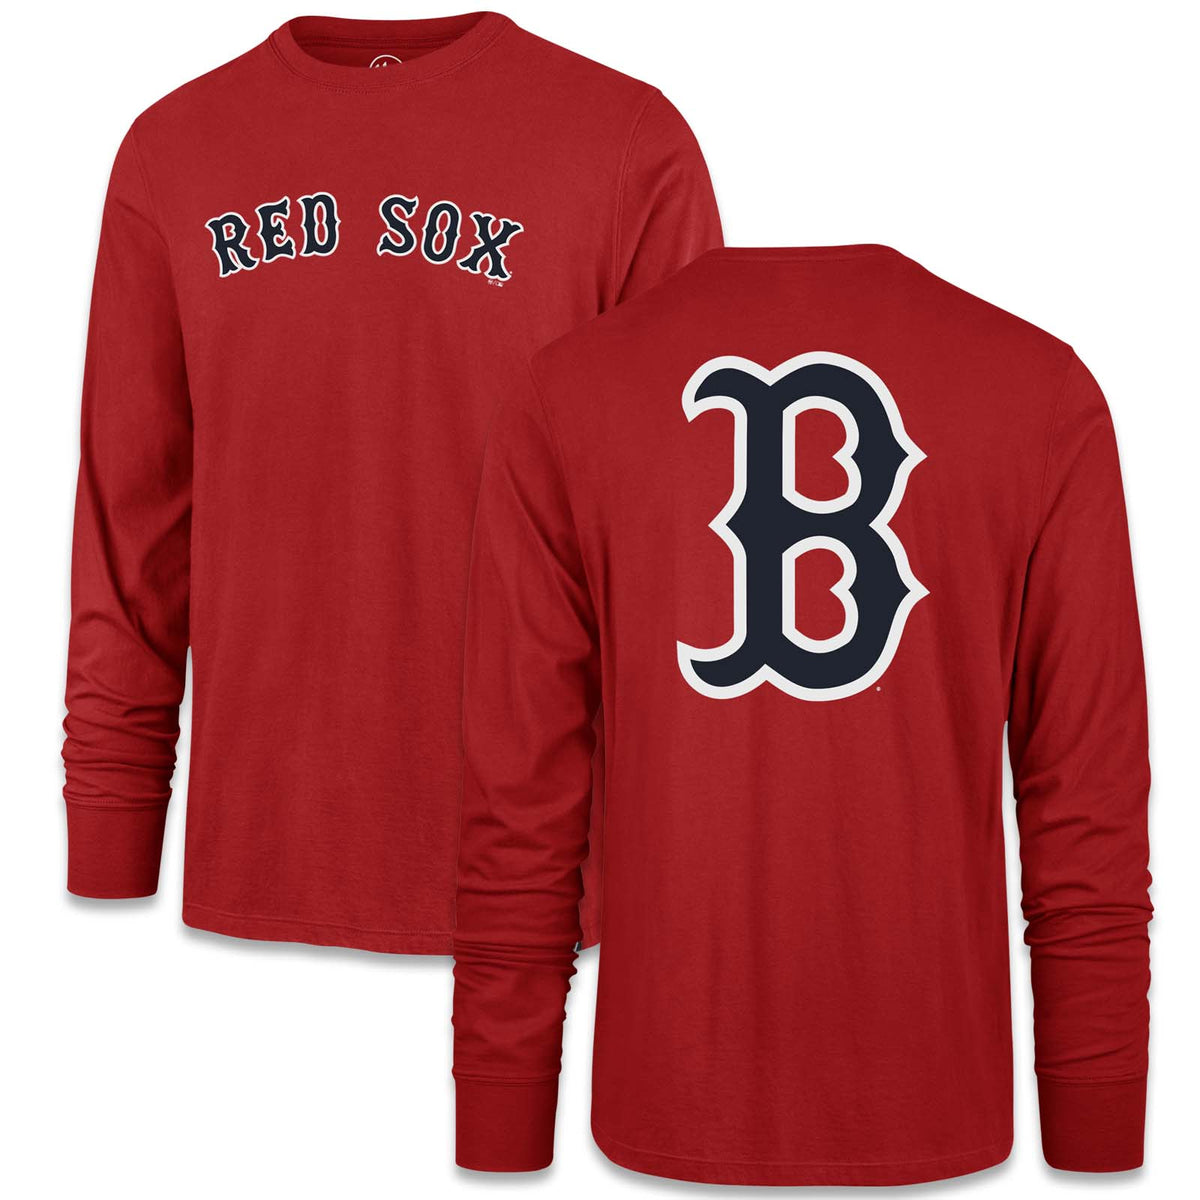 red sox shirt red